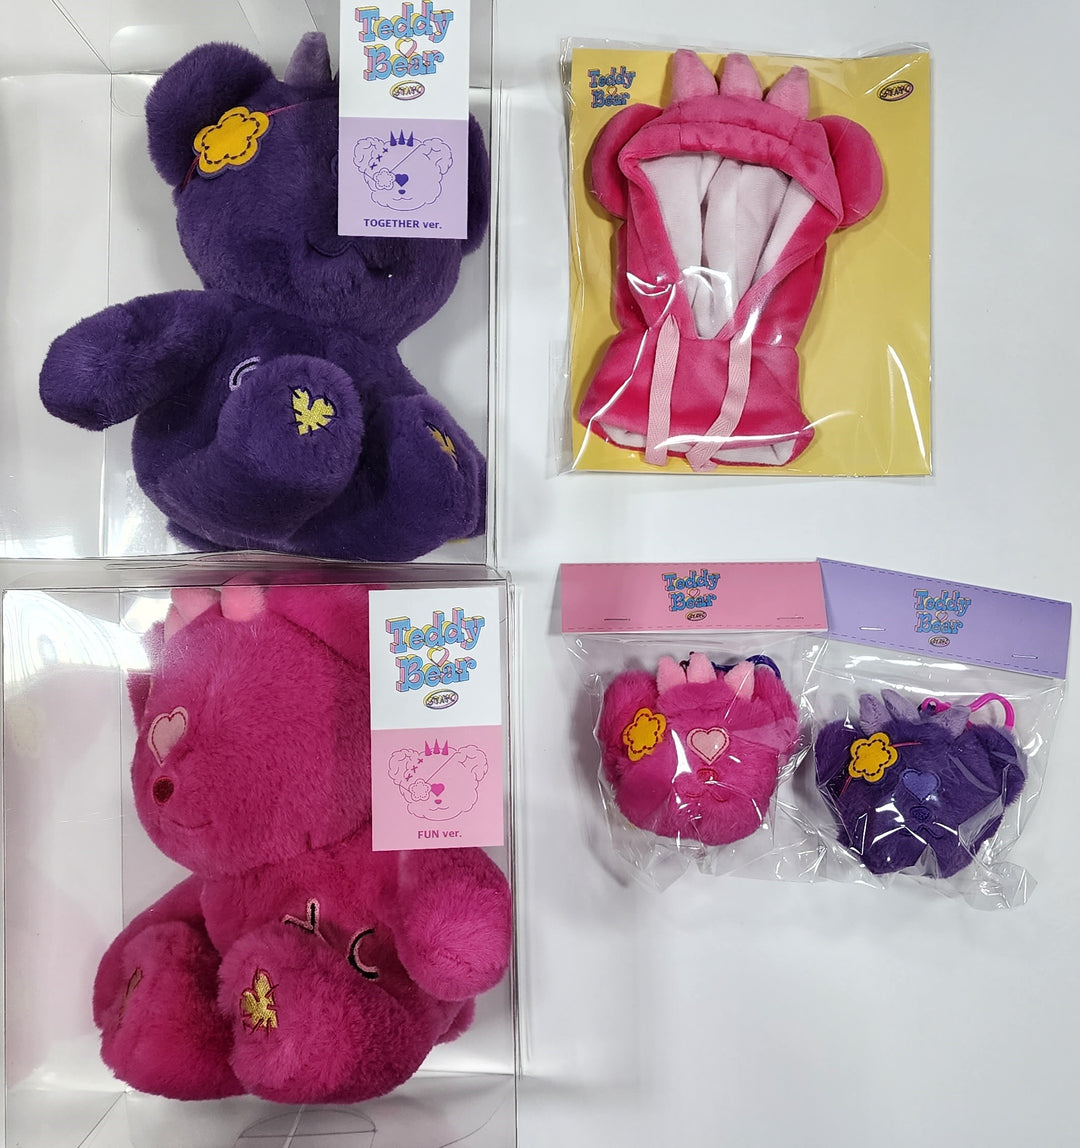 StayC "Teddy Bear" - Official MD [Doll, Doll Keyring, Lightstick Cape]